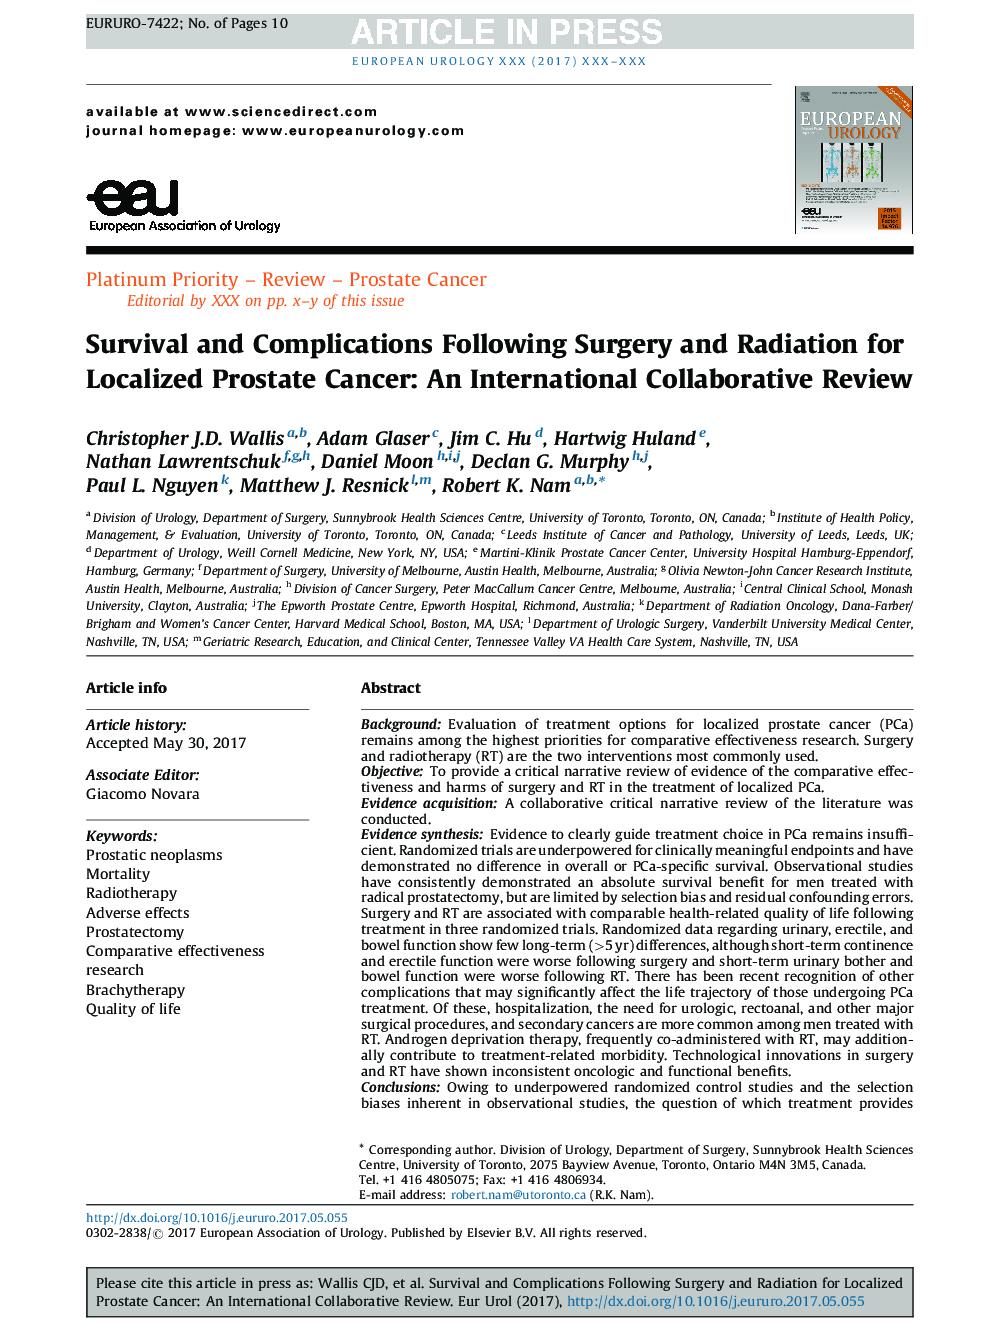 Survival and Complications Following Surgery and Radiation for Localized Prostate Cancer: An International Collaborative Review